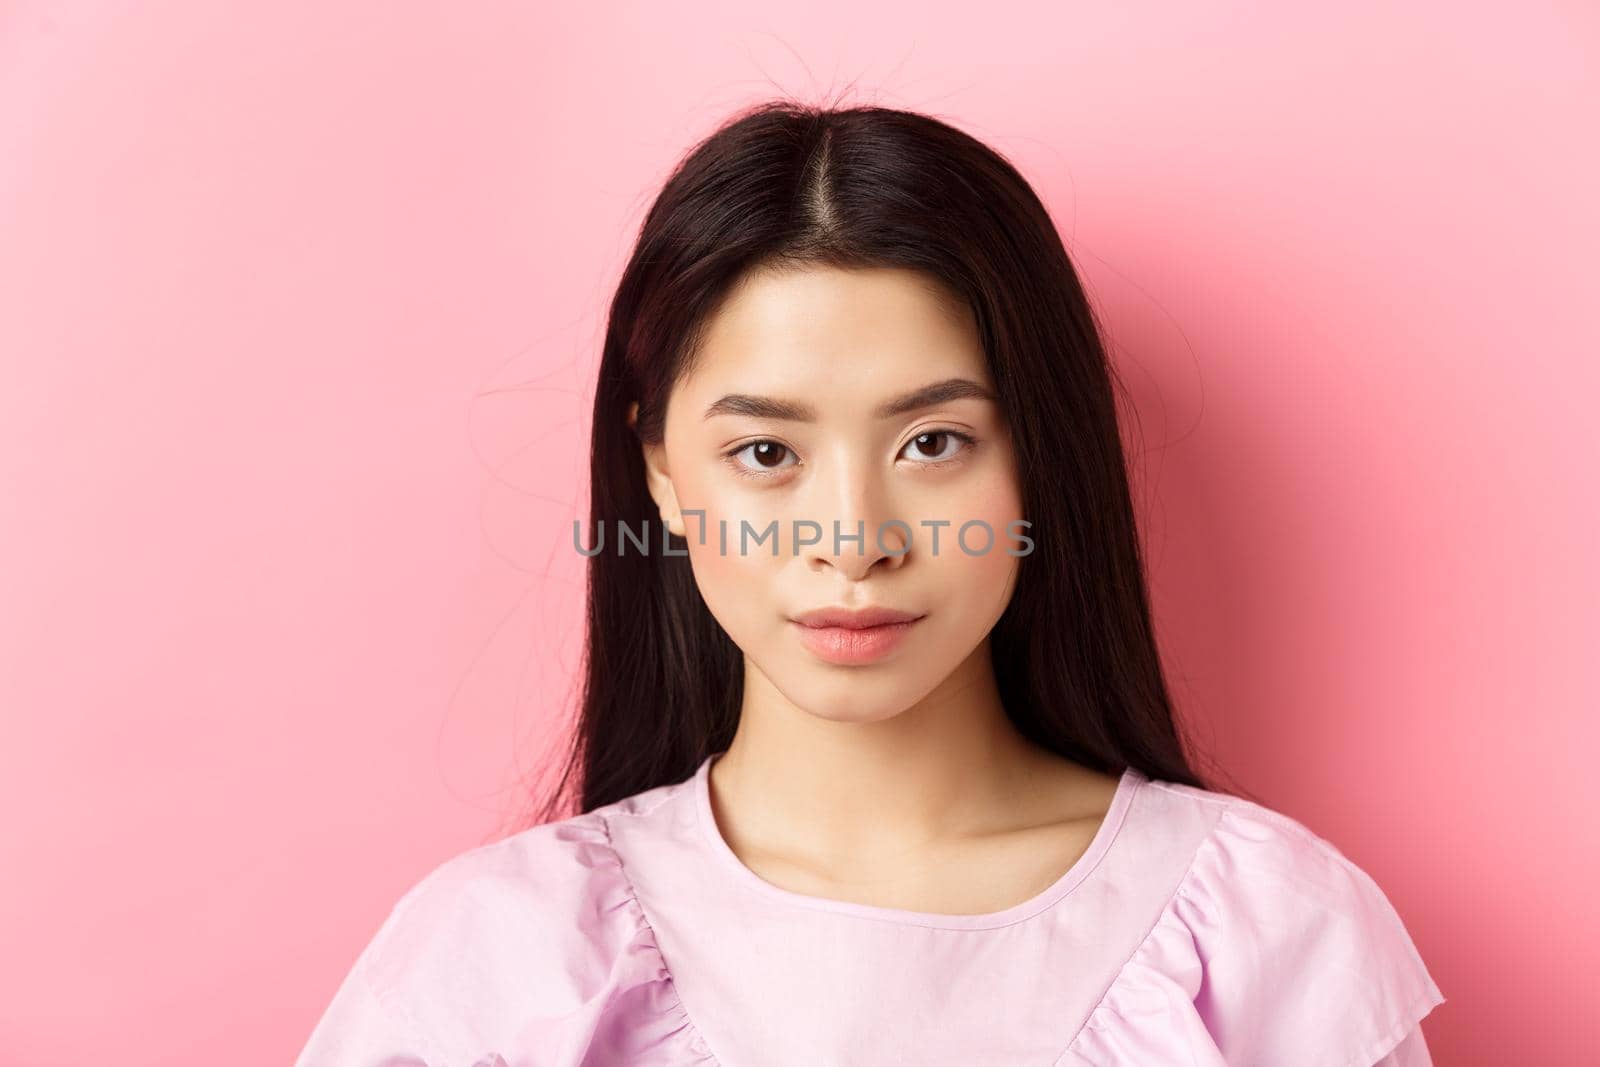 Close-up of beautiful young asian woman in dress, looking confident at camera, standing on pink background.